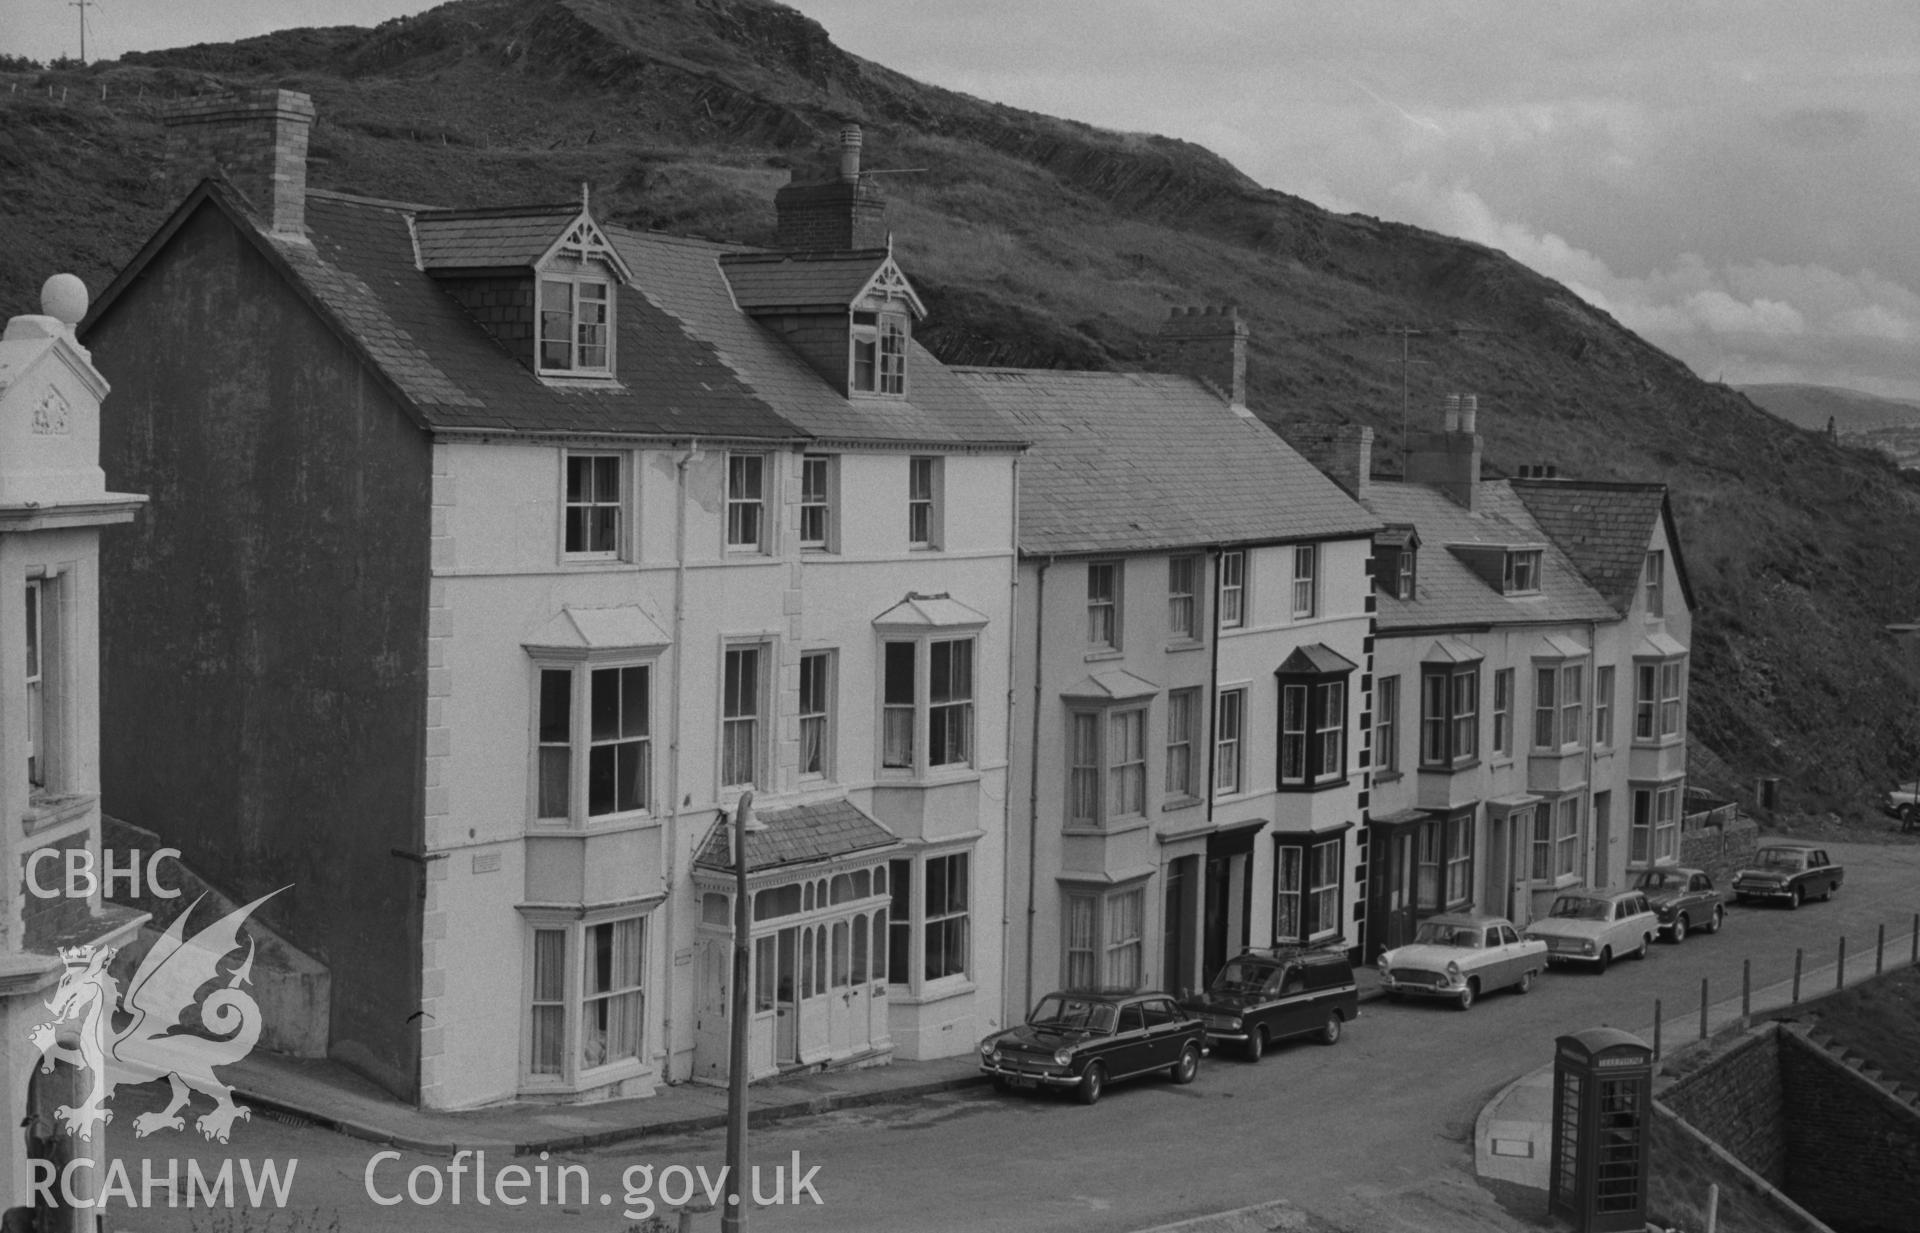 Digital copy of a black and white negative showing Sir Henry Walford Davies' house at the corner of Queen's Road and Cliff Terrace, Aberystwyth. Photographed by Arthur O. Chater on 15th August 1967 looking east from Grid Reference SN 584 825.